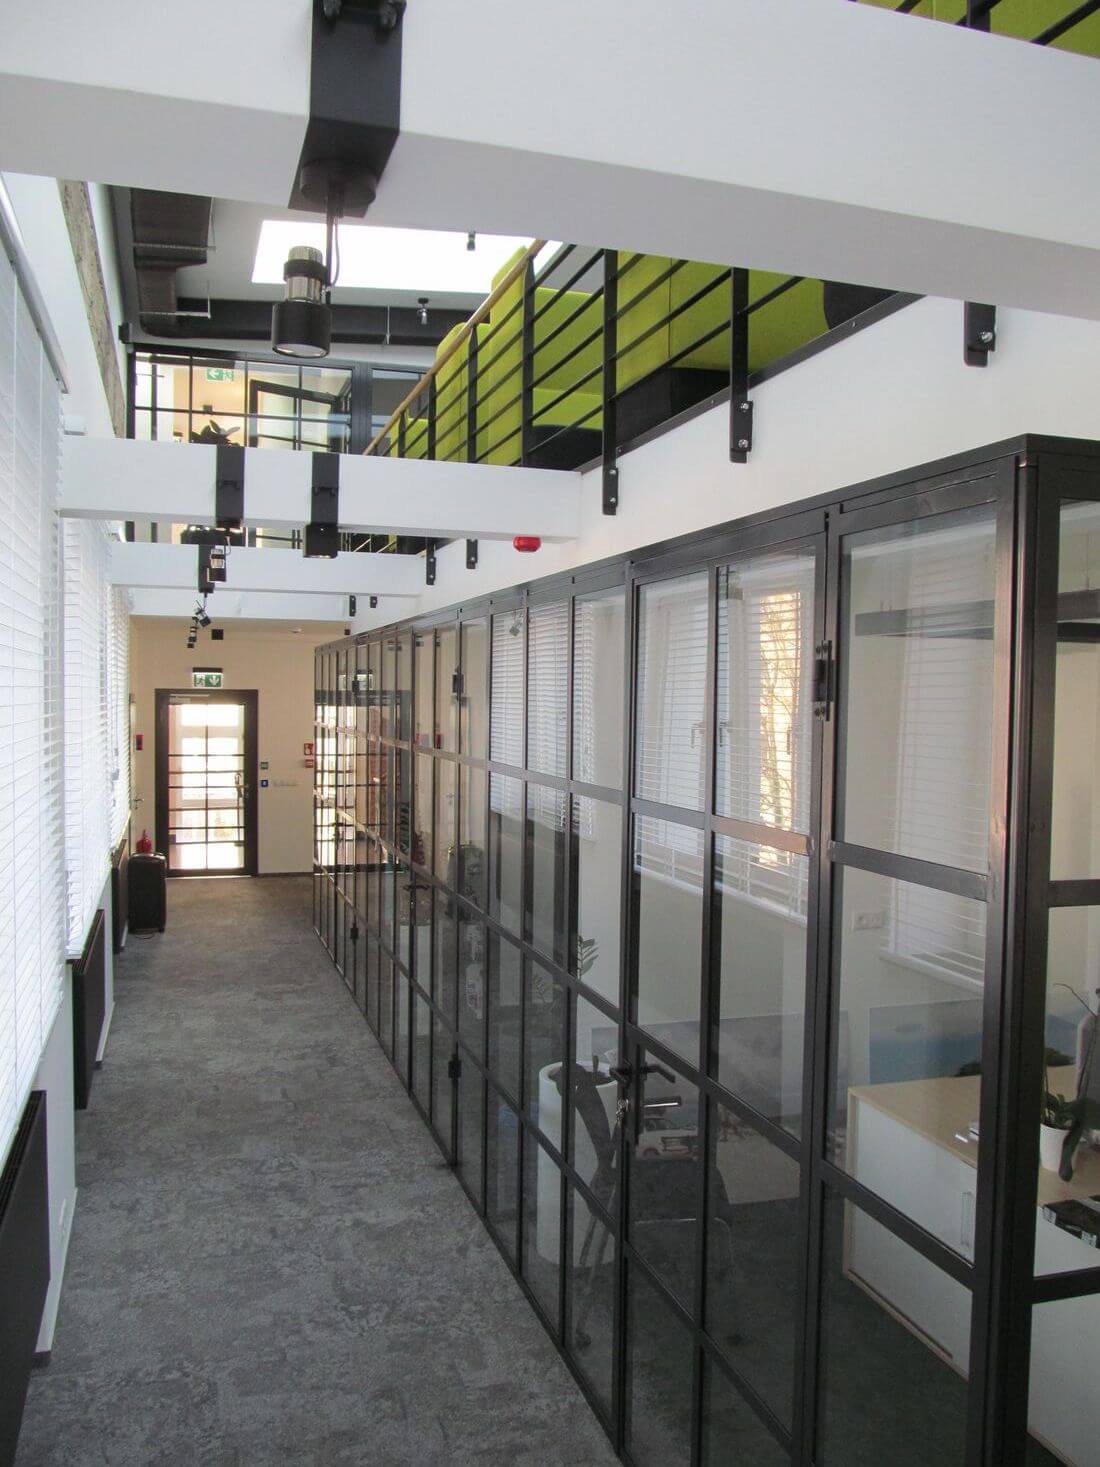 EIP Loft System Industrial Loft Doors and Loft Walls made of structural steel and glass in Warsaw